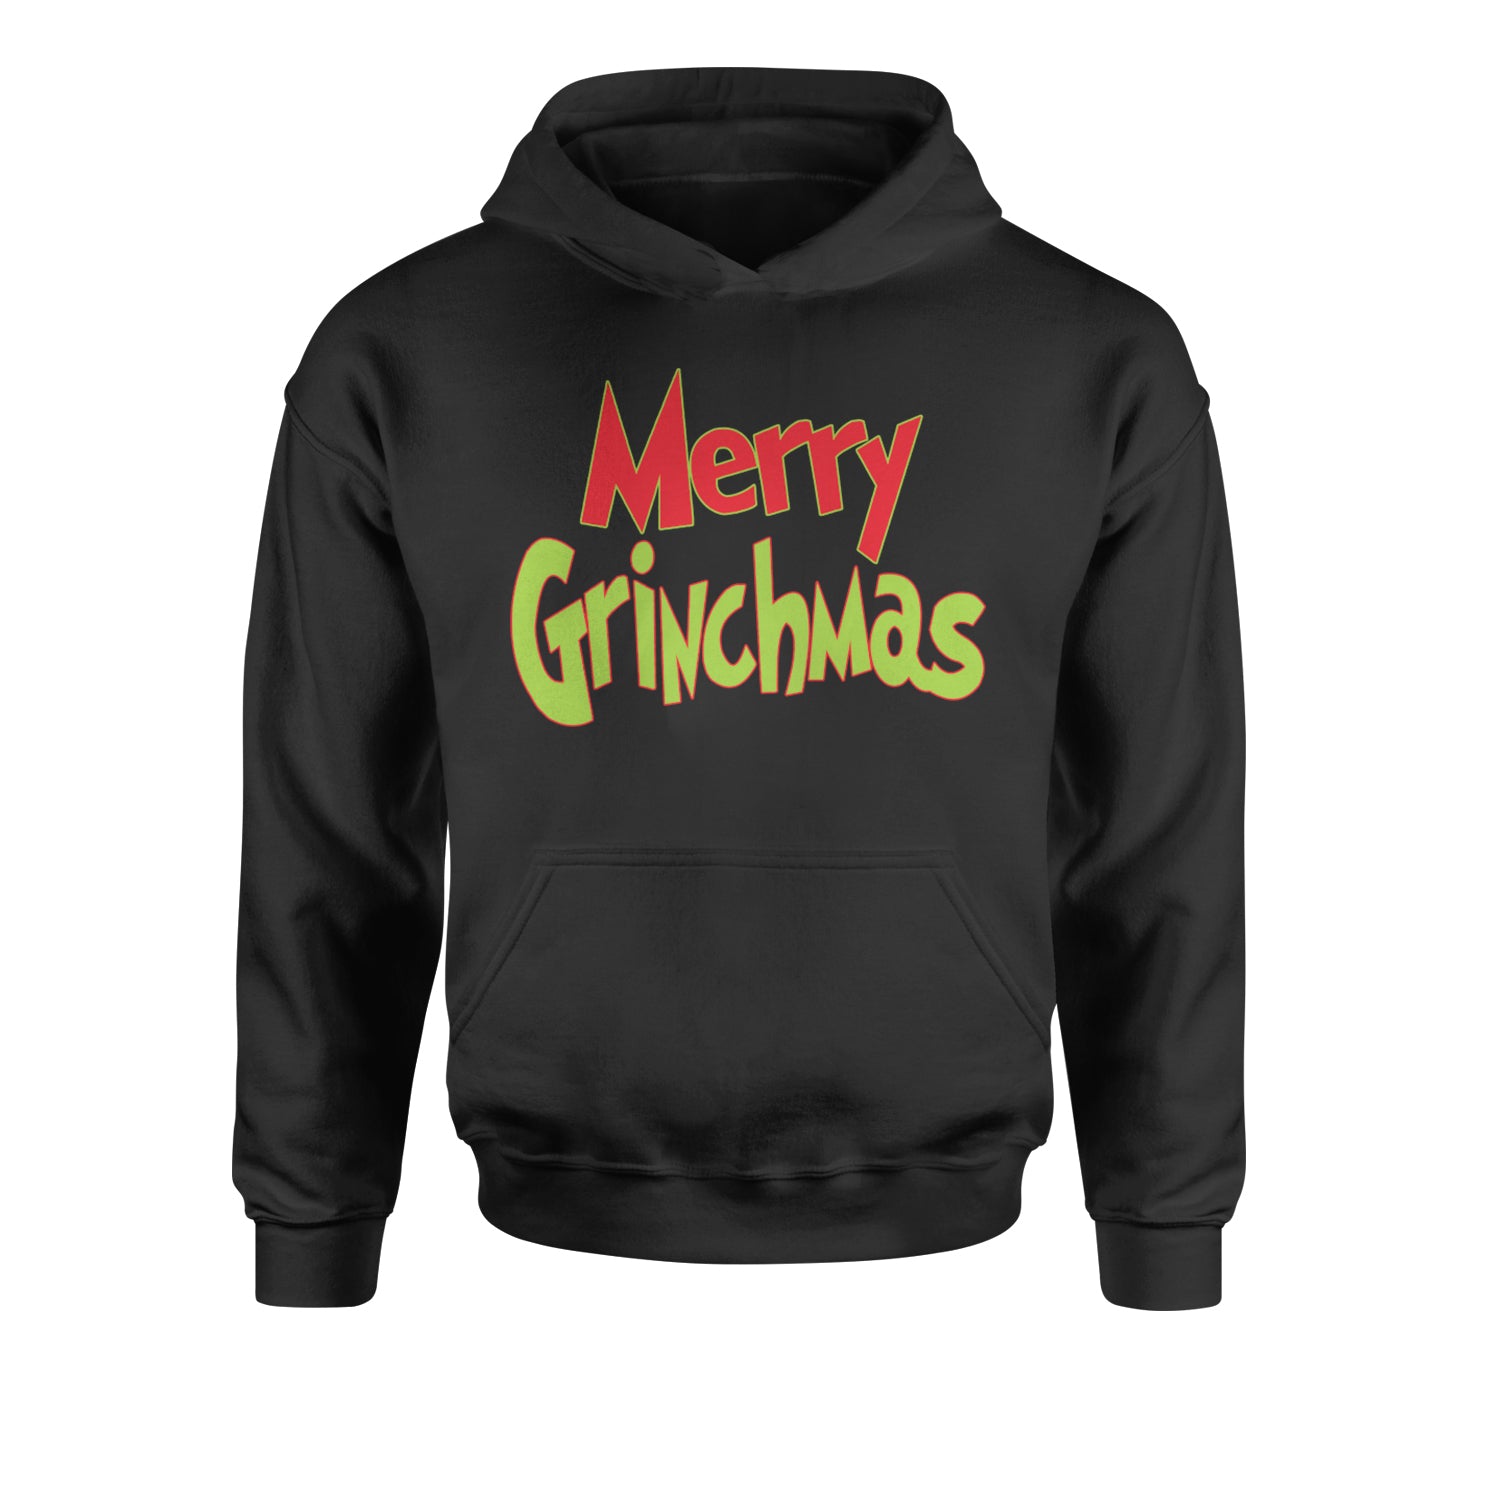 Merry Grinchmas Jolly Merry Christmas Youth-Sized Hoodie